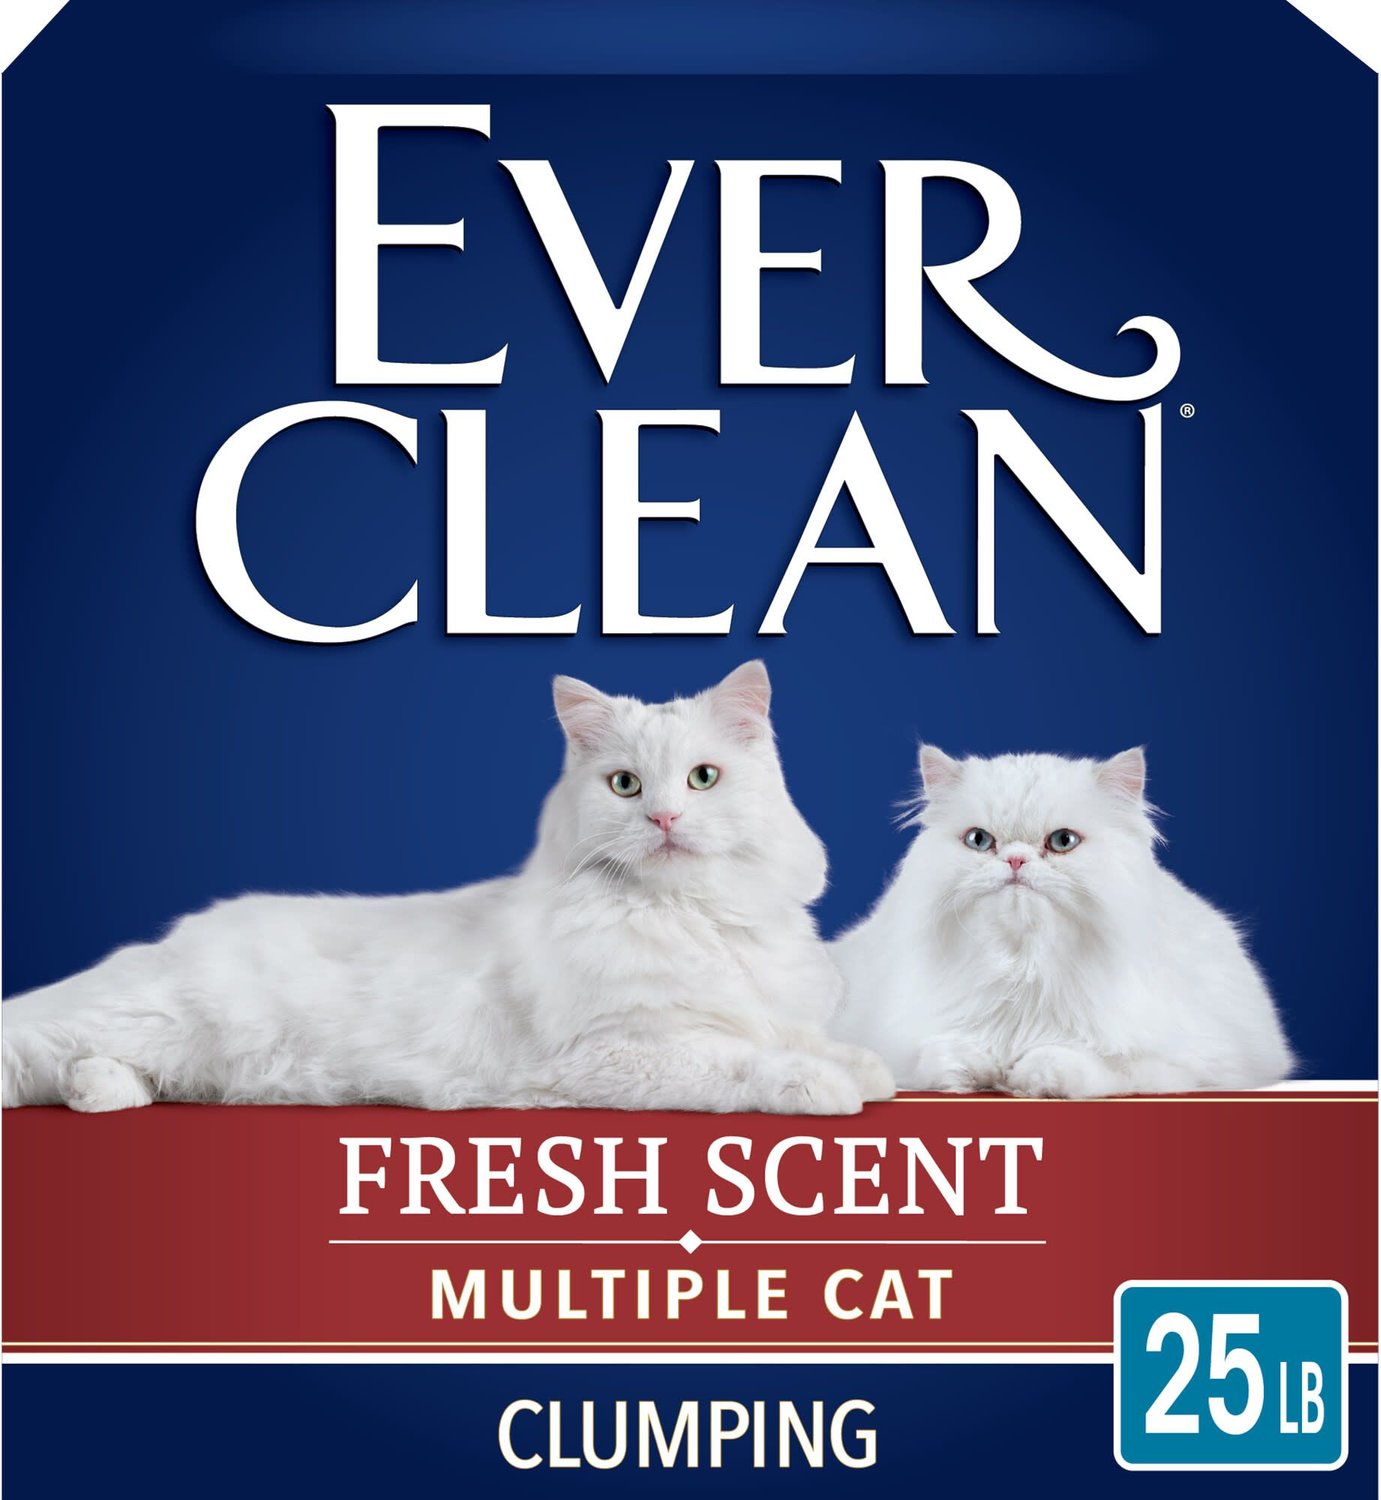 Aroma Ever Clean Extra Fuerte agrupamiento Cat Litter 10 L 